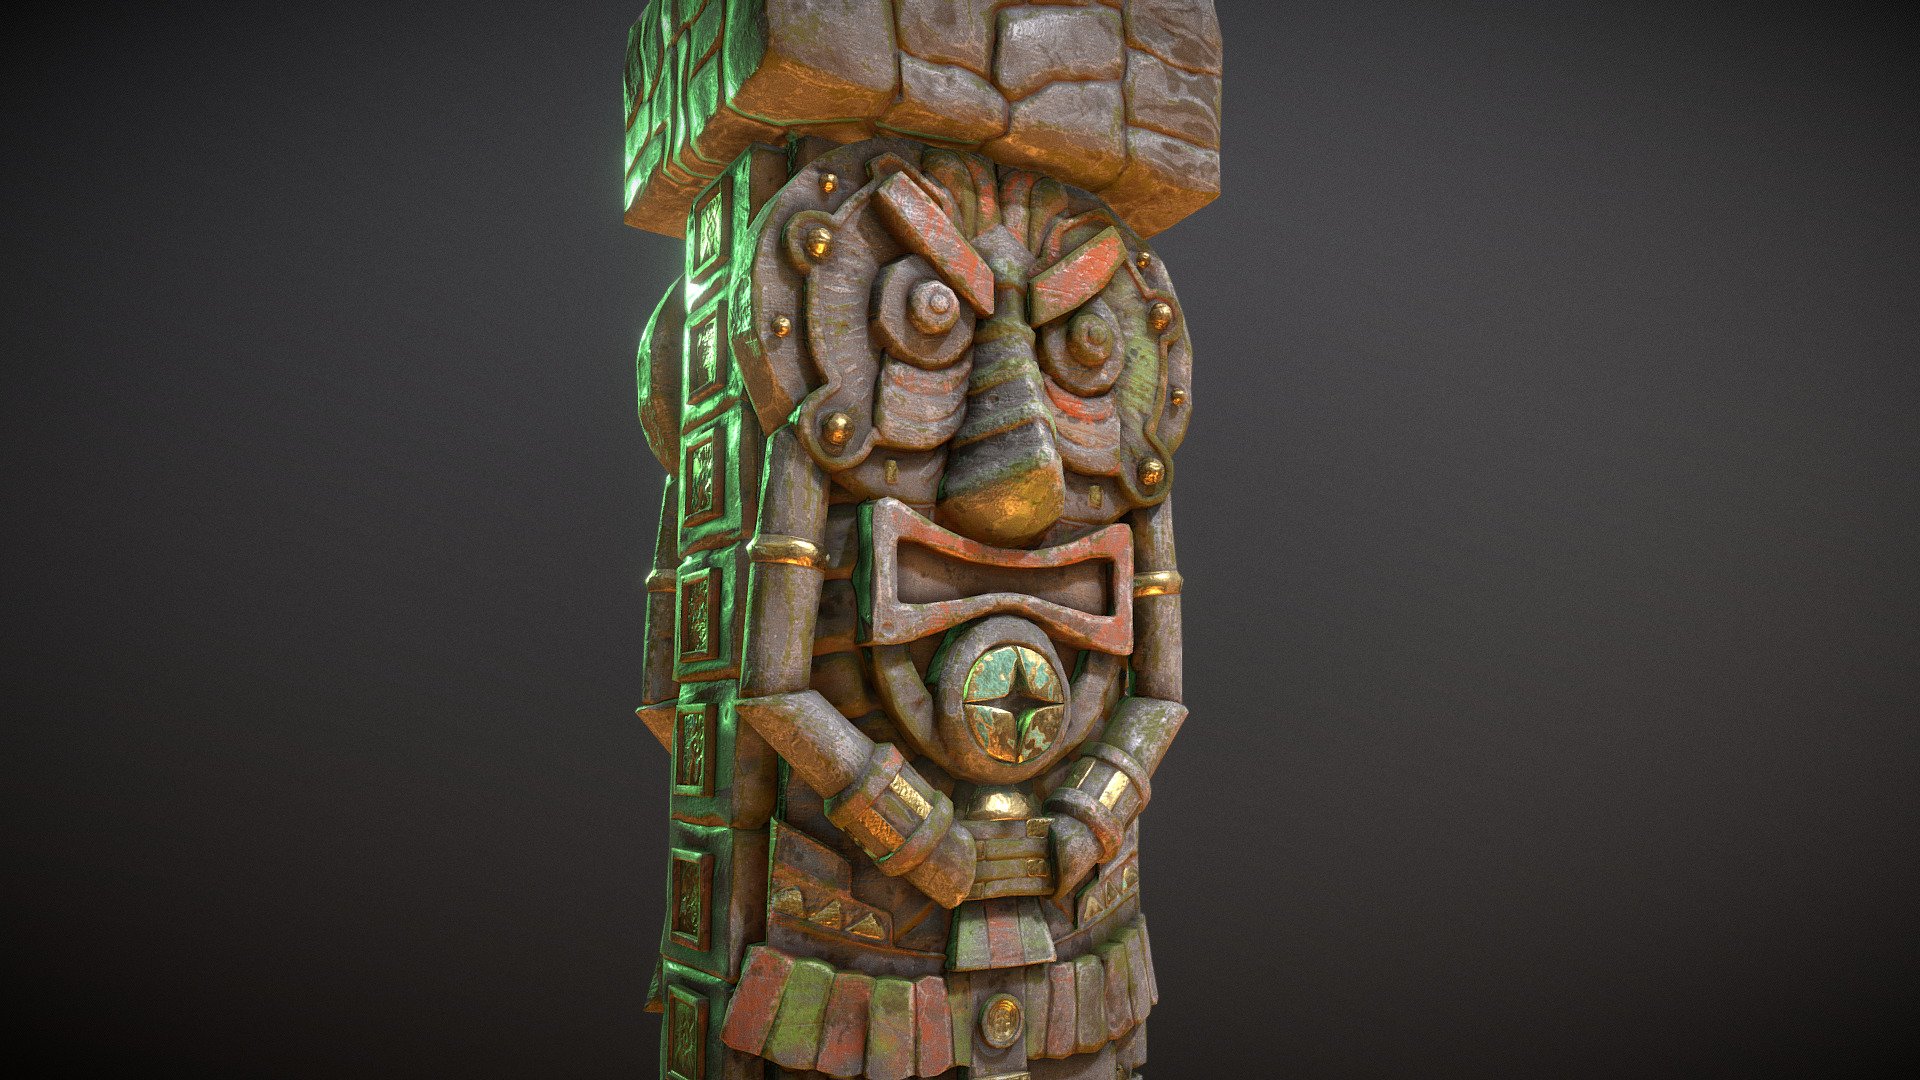 Done for a school assignment.
An old pillar that has a face engraved into it that has weathered trough time.

Done With Maya, ZBrush and substance painter 3d model